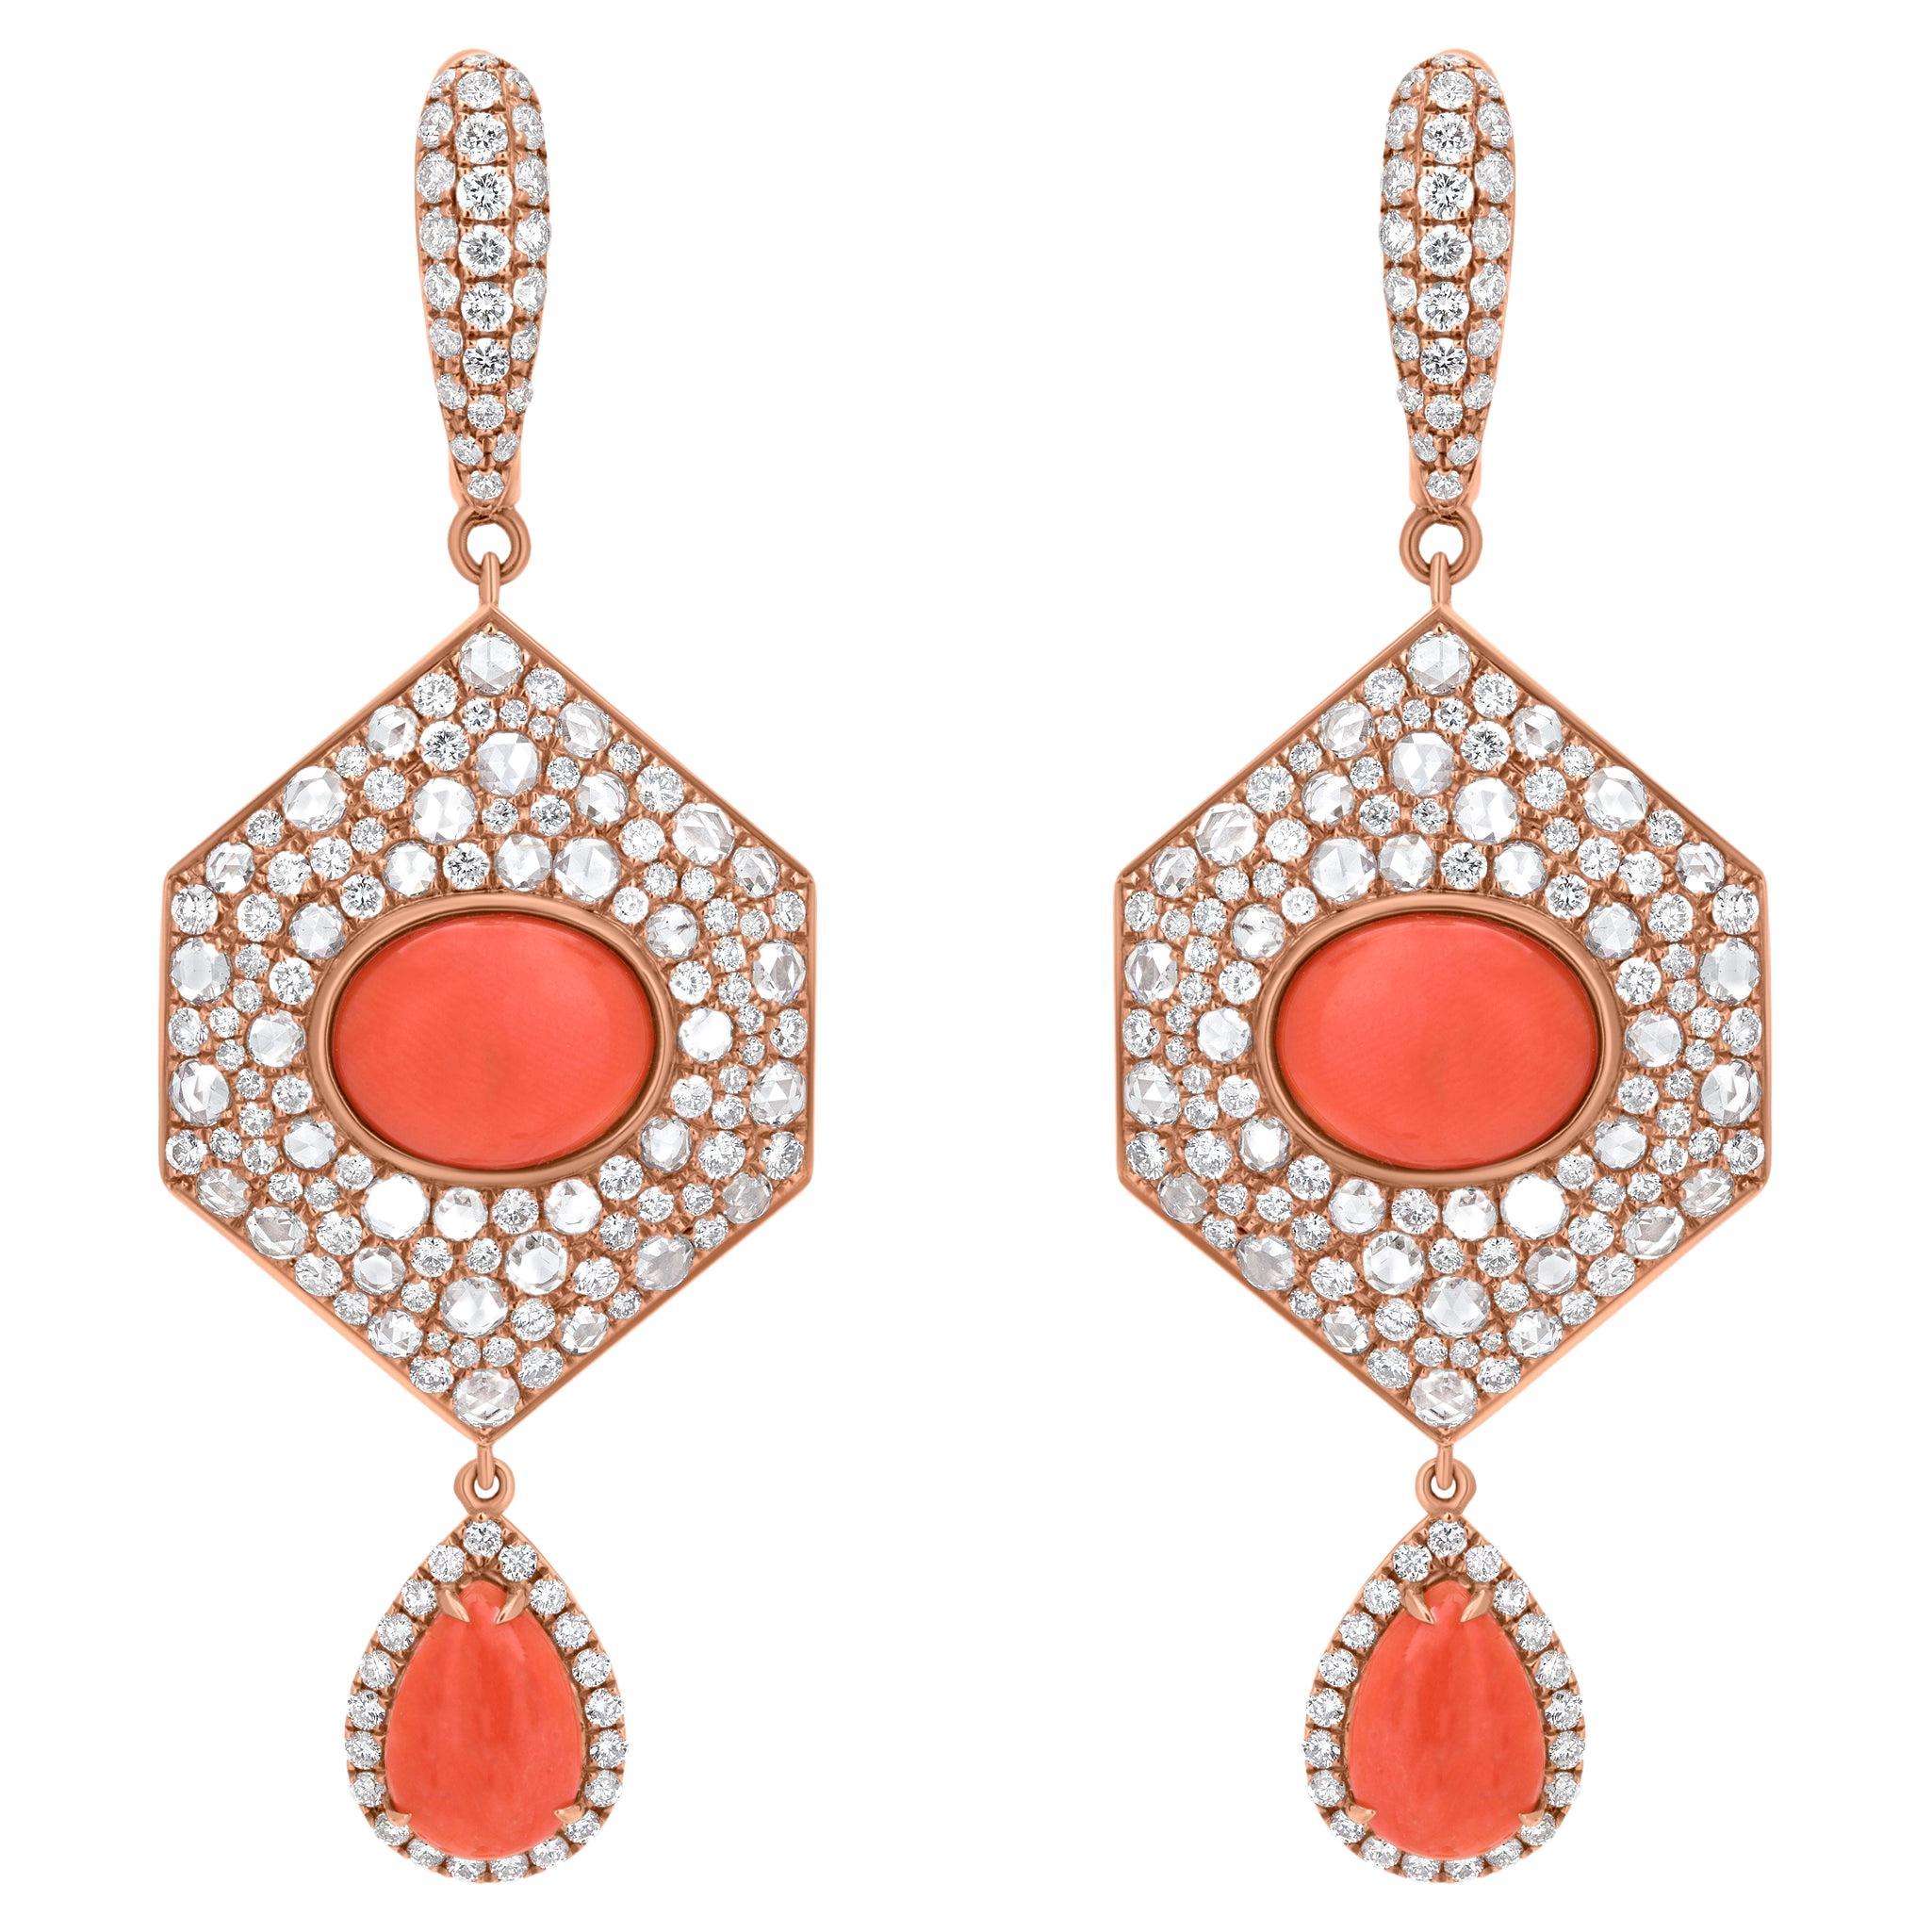 Nigaam 8.66 Cttw, Peach Coral, Red Coral and Diamond Dangle Earrings in 18K Gold